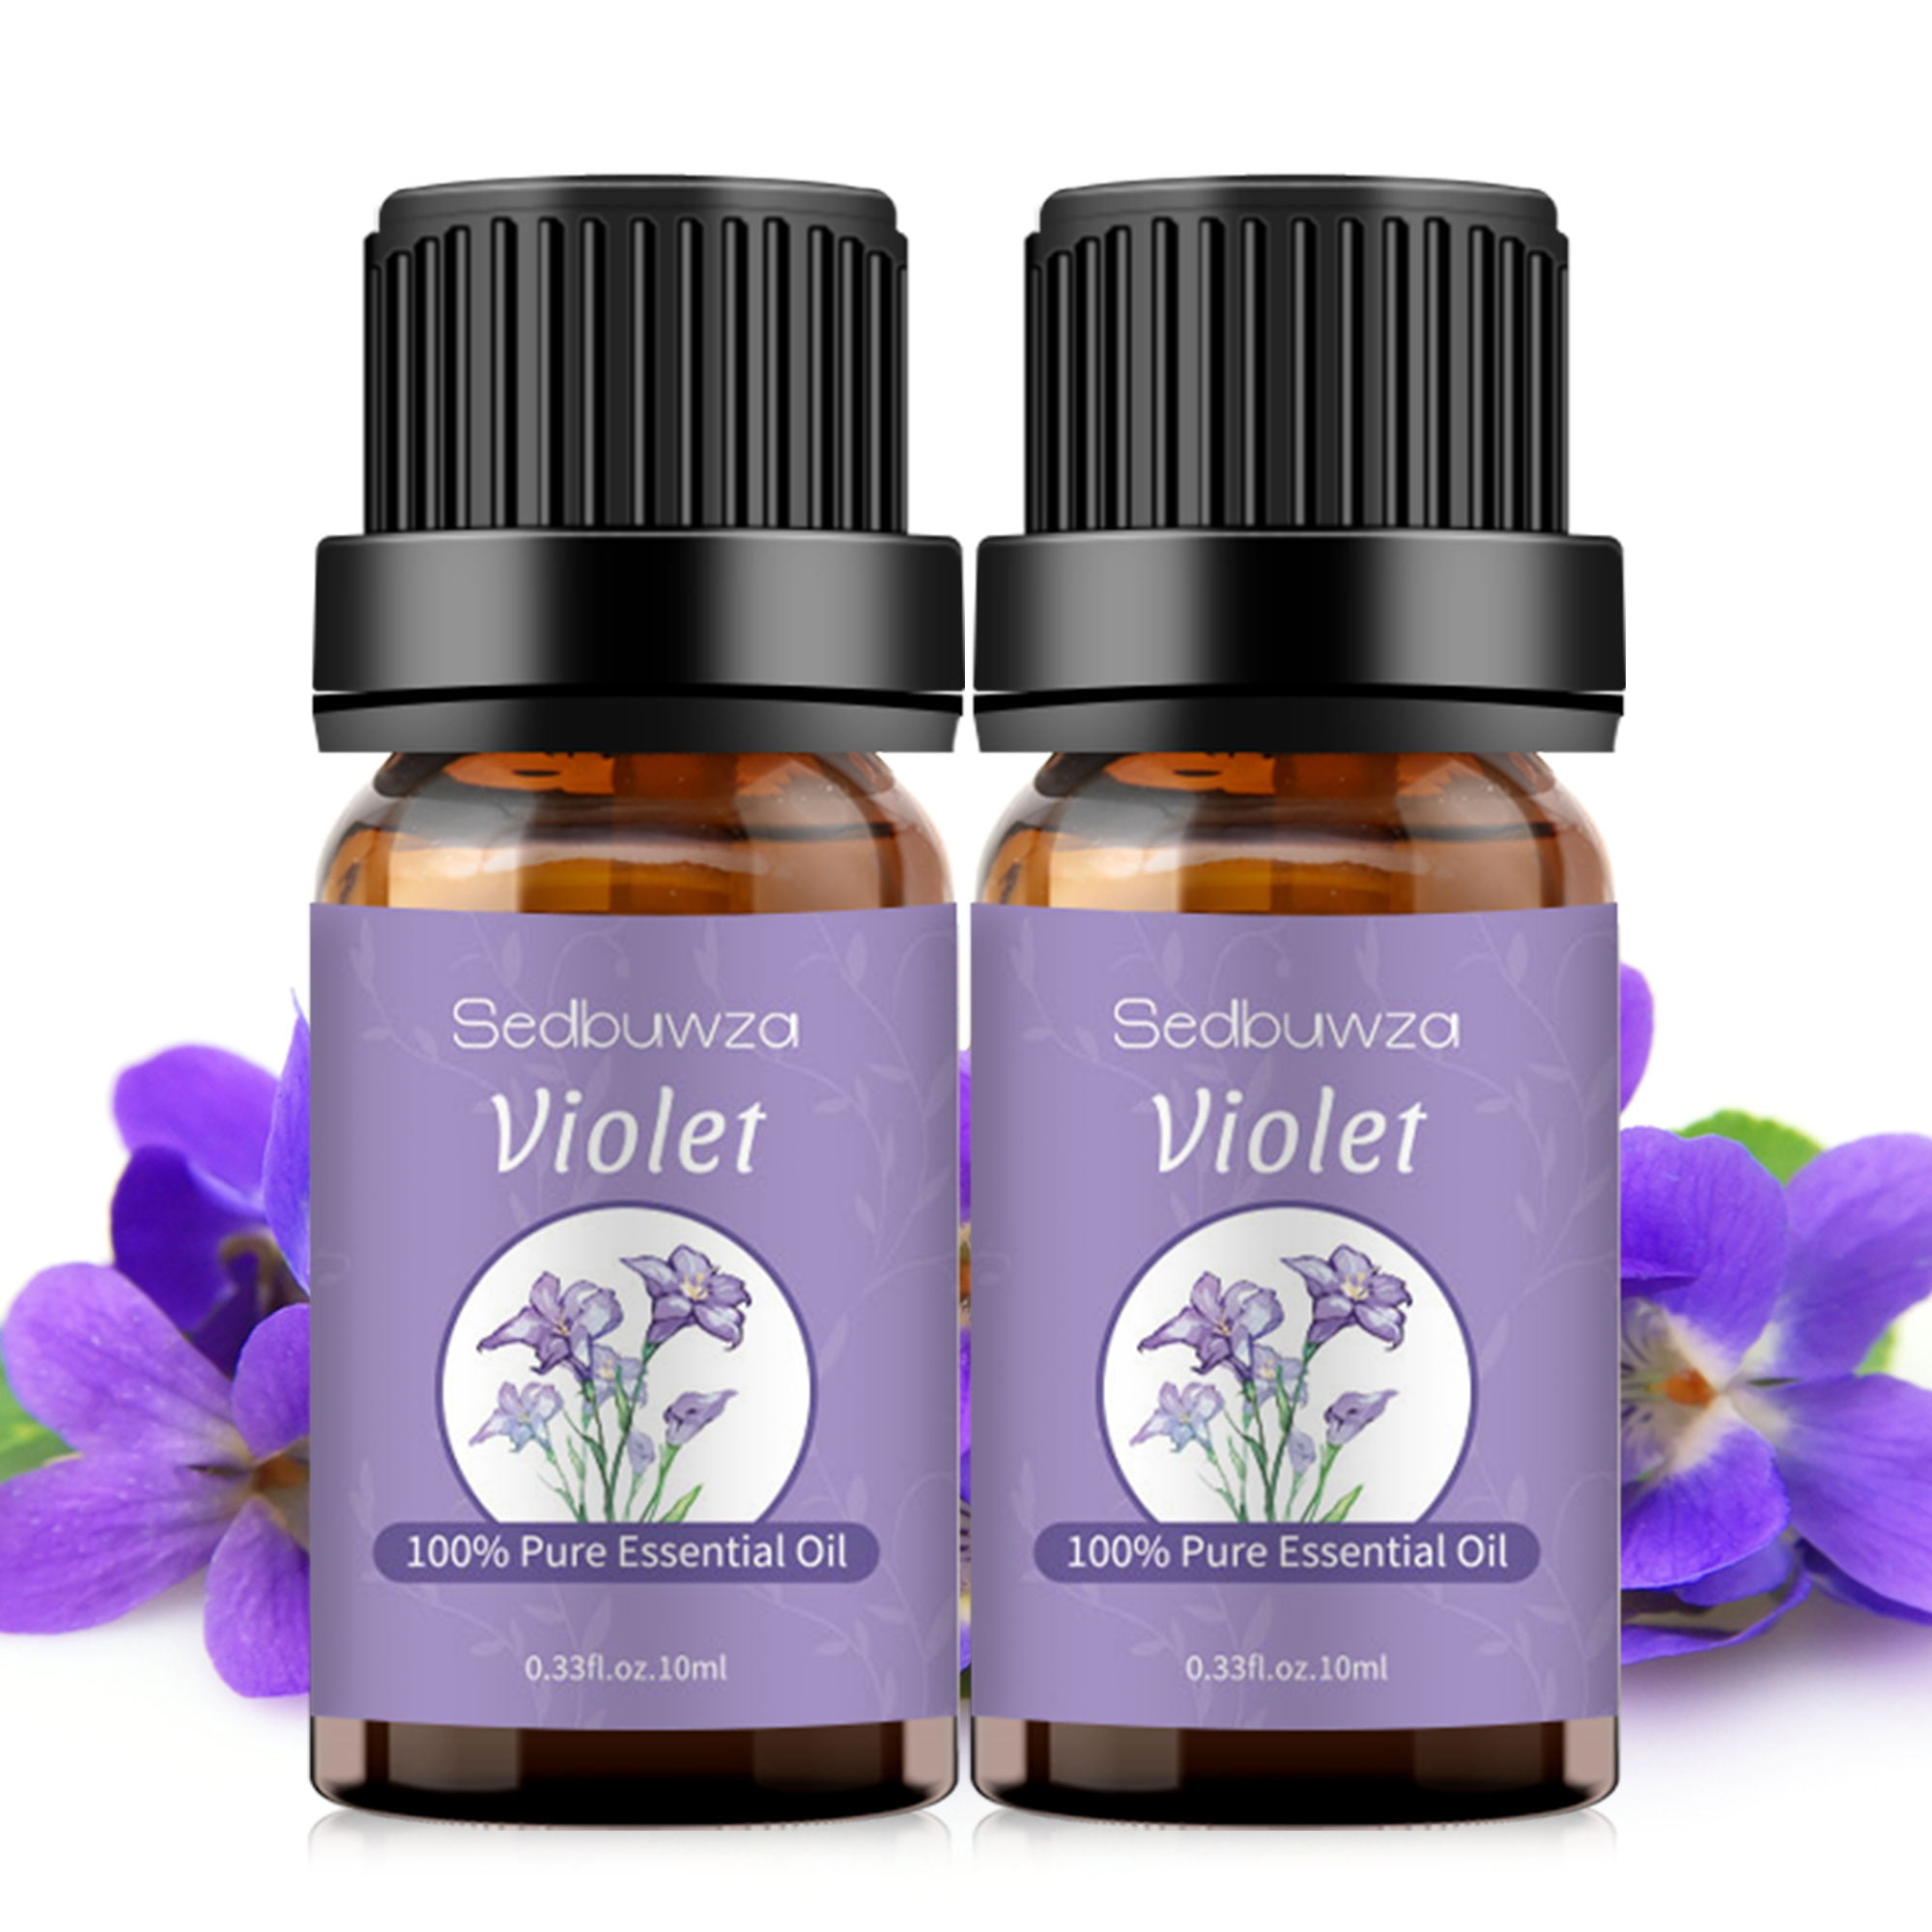 Sedbuwza Violet Essential Oil 100% Pure, Undiluted, Natural, Aromatherapy  10ml